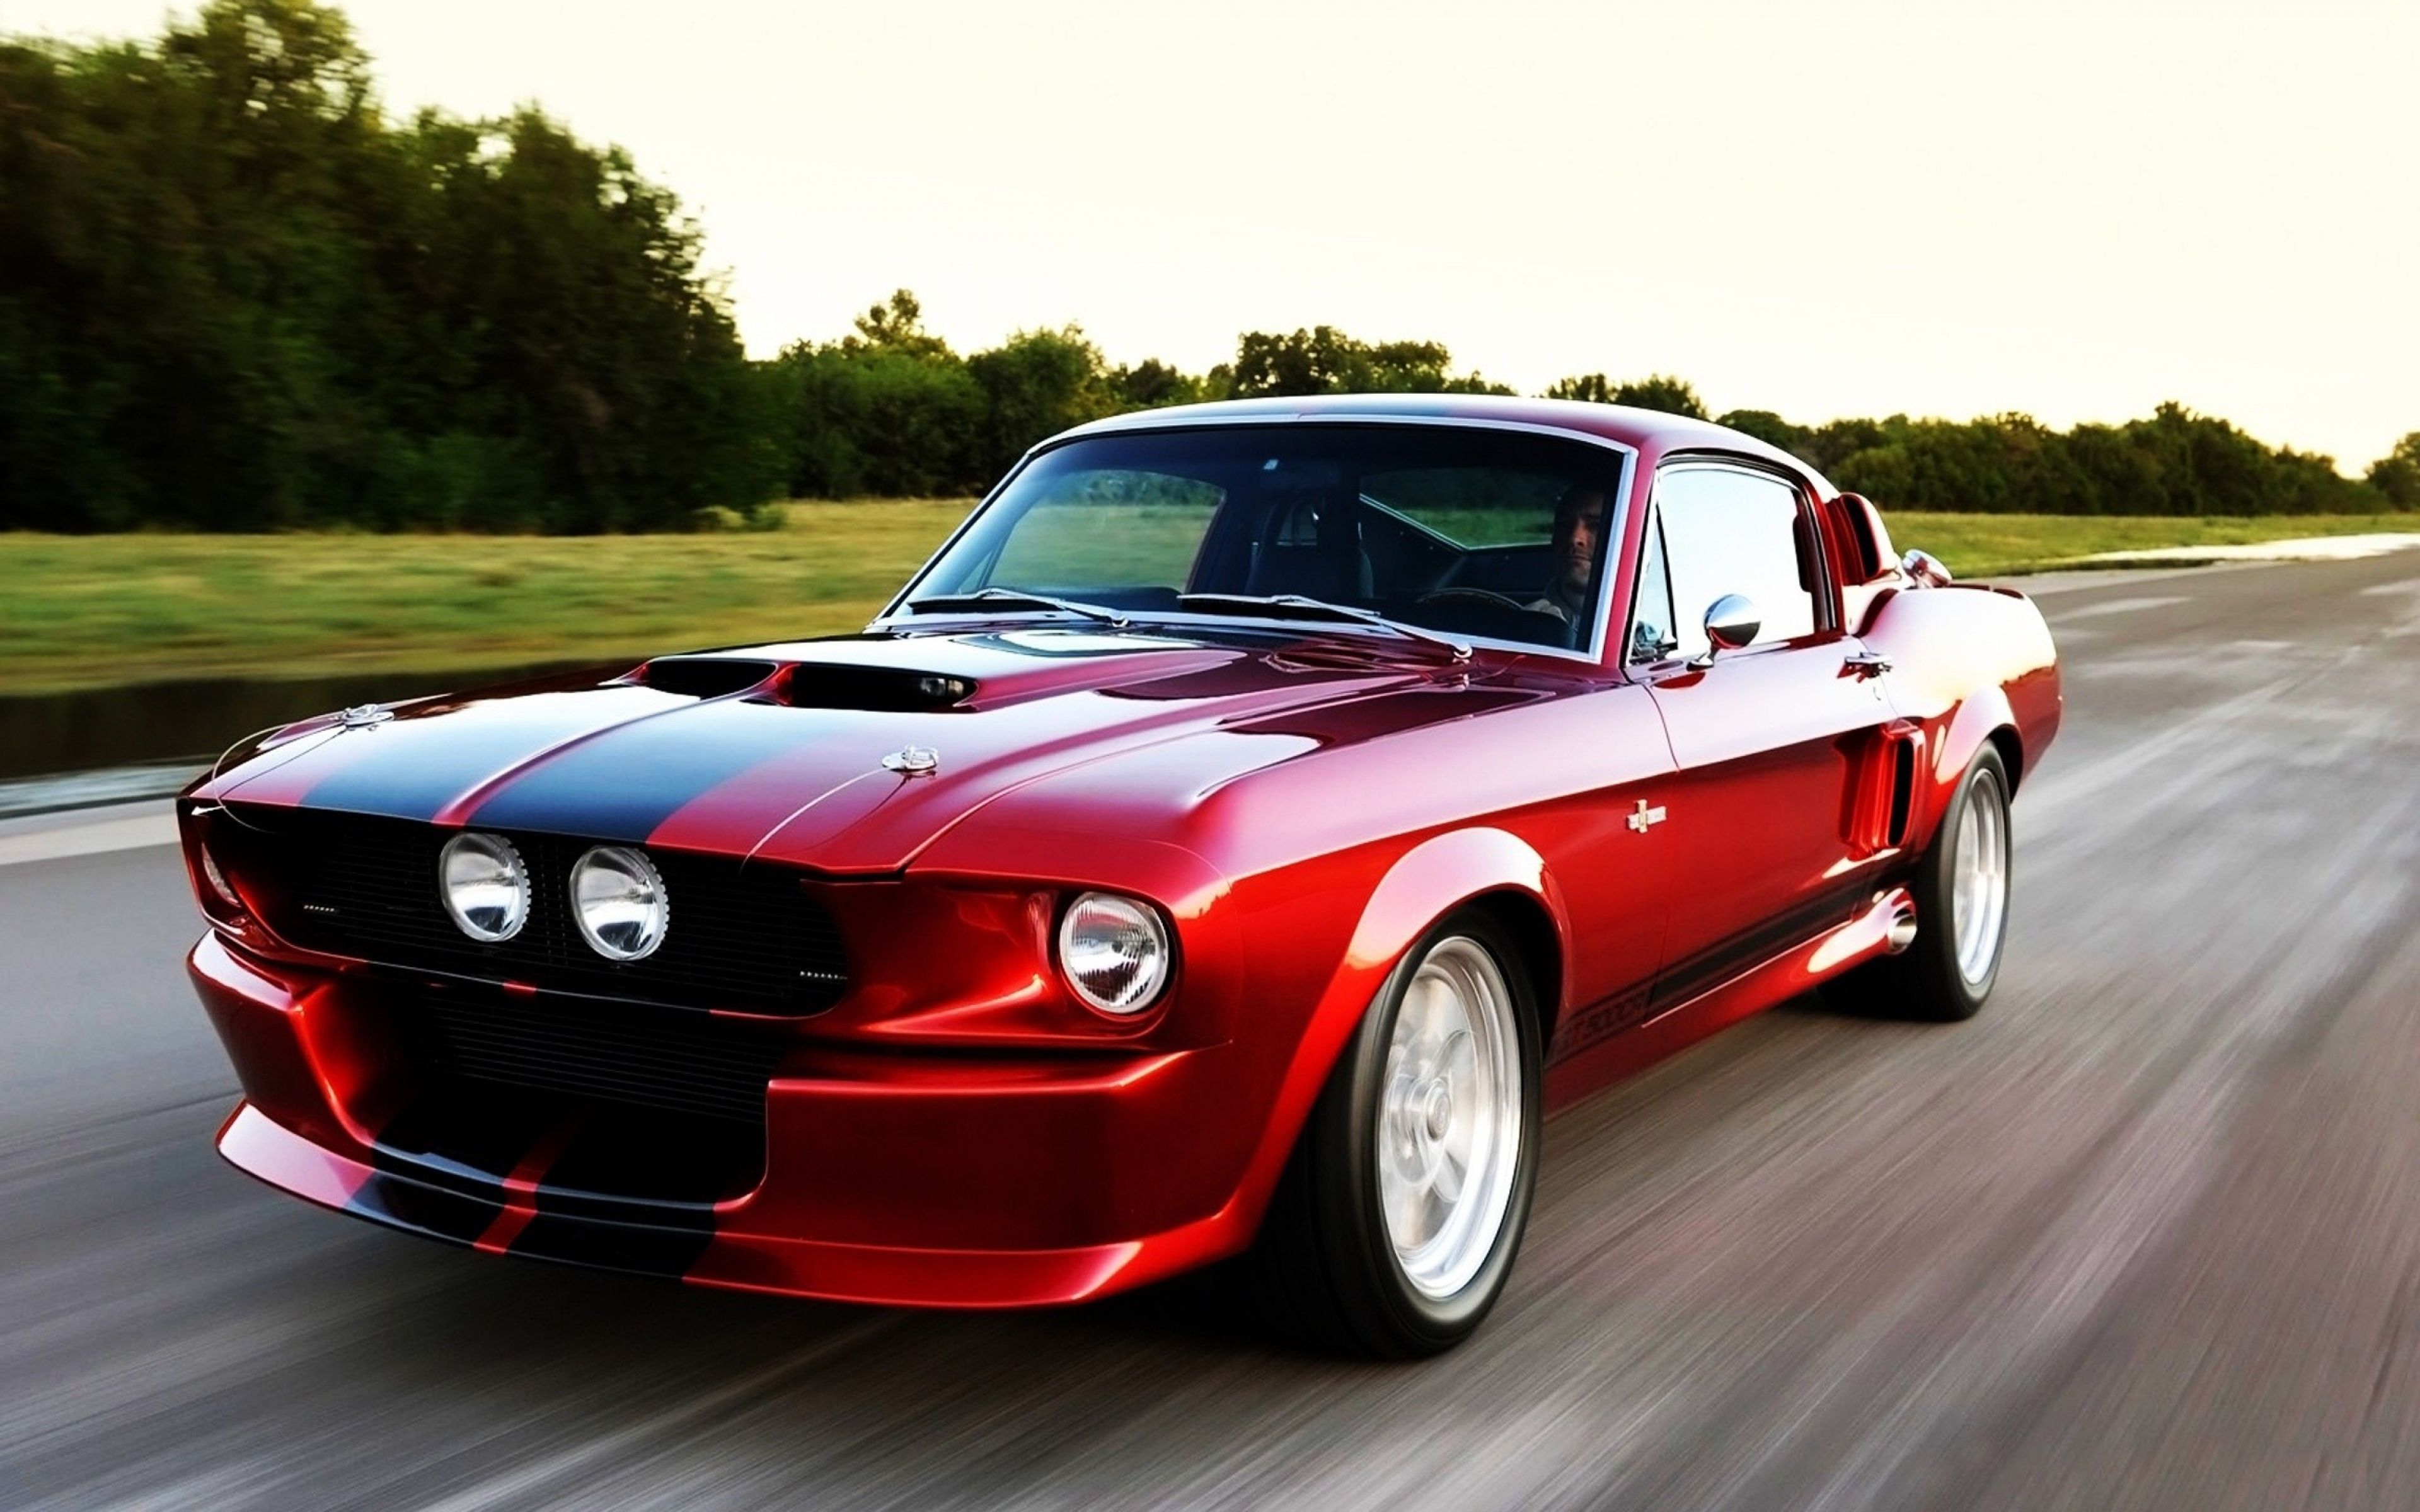 Free download Download Wallpaper 3840x2400 Ford Ford mustang Red